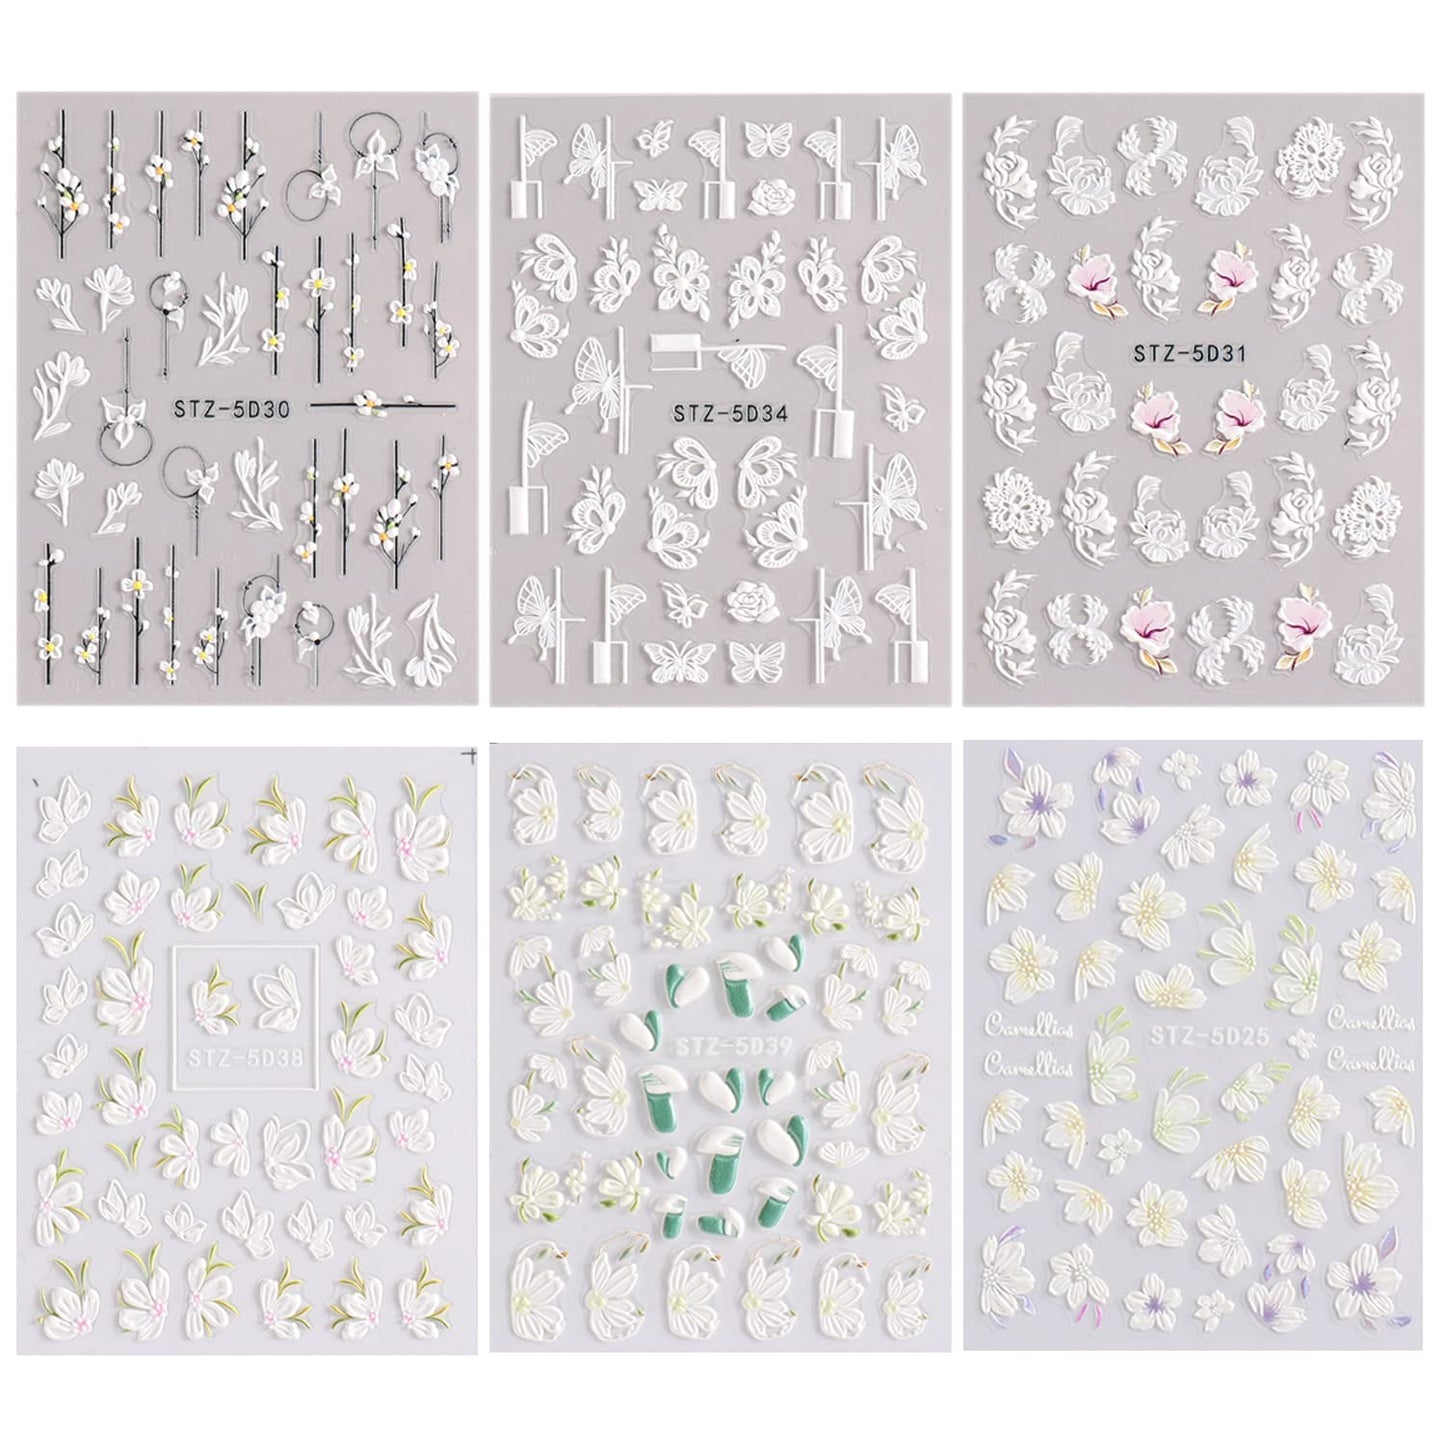 ZZIYEETTM 5D Embossed Spring Flower Nail Art Stickers Decals 6 Sheets Engraved Butterfly French Tips Nail Designs Adhesive Nail Stickers for Women